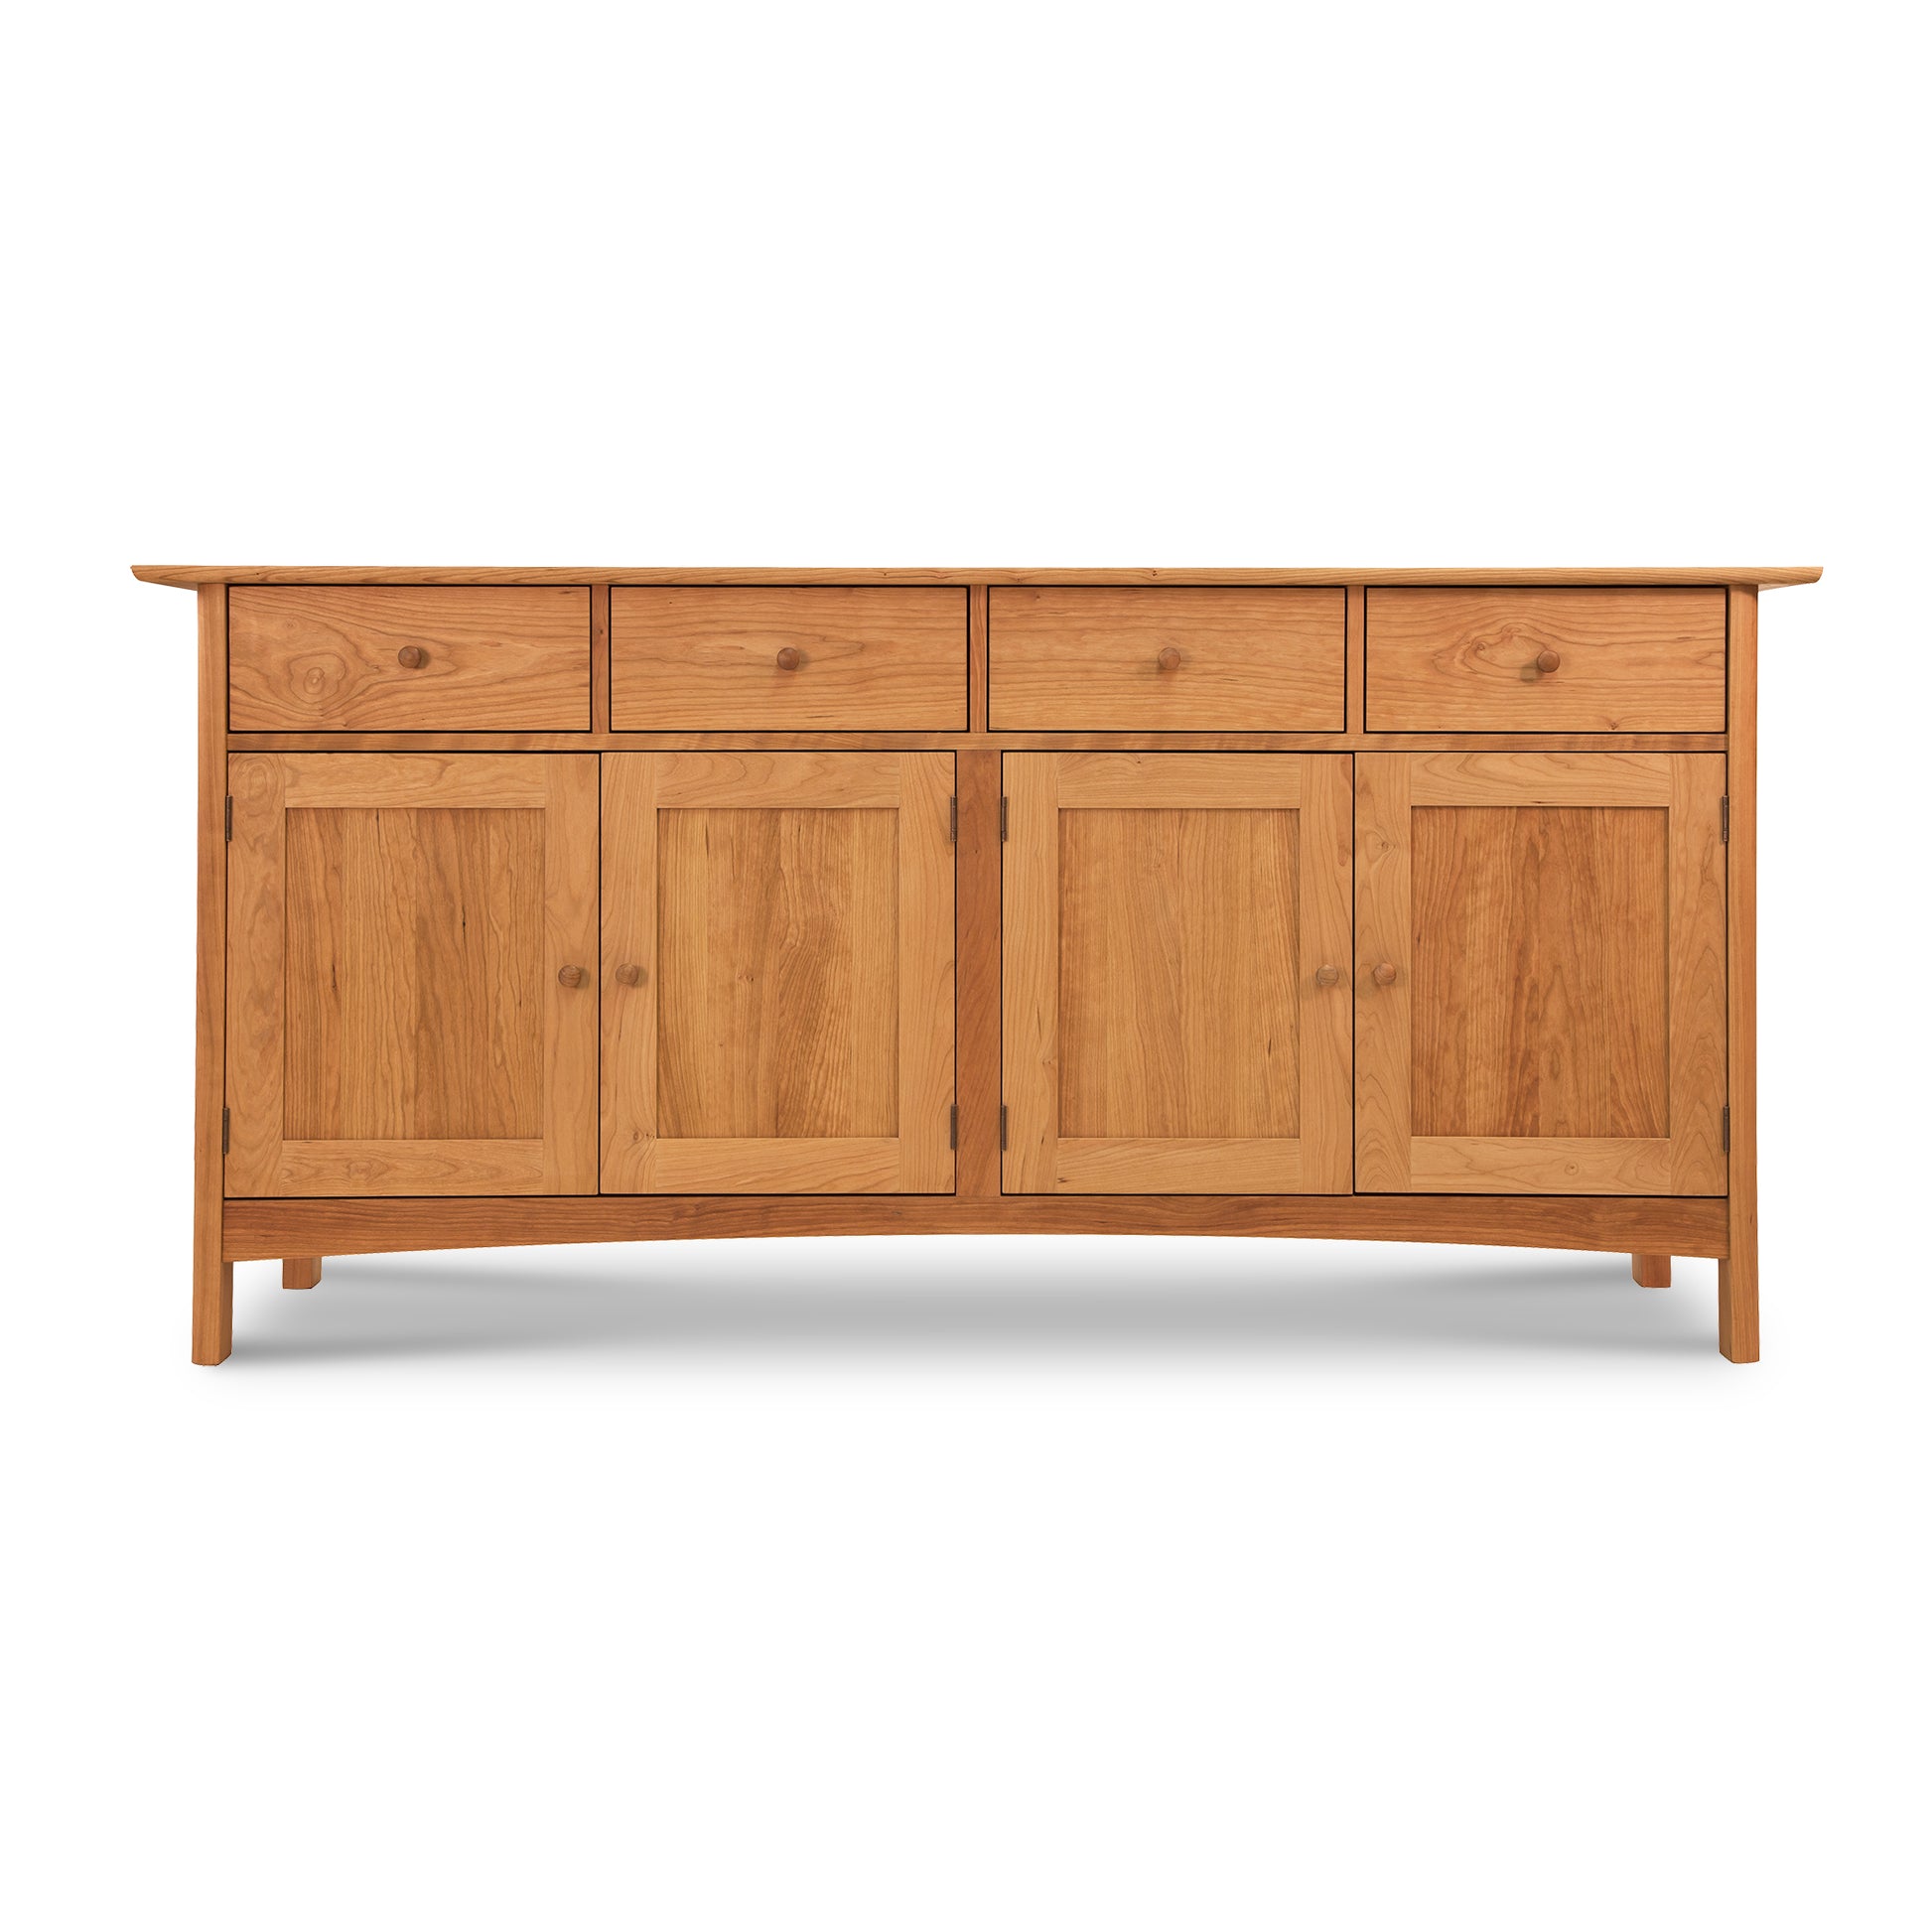 A solid wood Vermont Furniture Designs Heartwood Shaker Long Sideboard with six drawers and three cabinets, isolated on a white background.